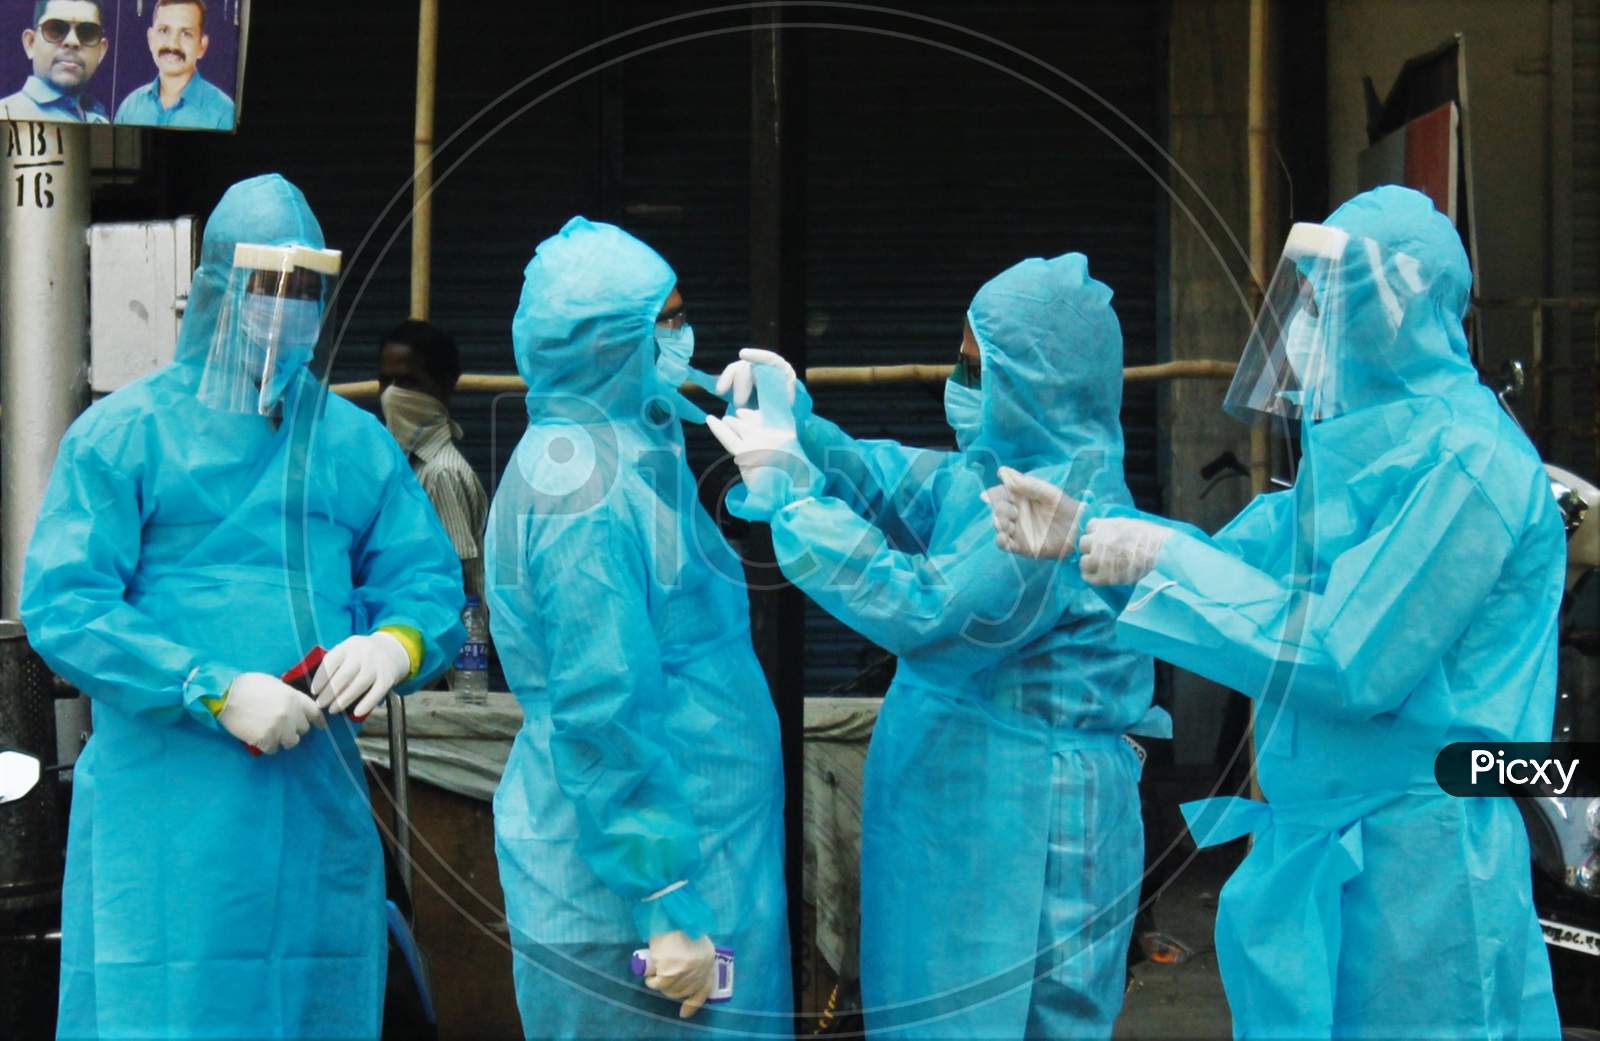 Healthcare workers wearing protective suits help each other to wear a mask before going to visit a slum area at Worli to test the residents for coronavirus during the nationwide lockdown to limit the spreading of coronavirus disease (COVID-19) in Mumbai, India on April 20, 2020.